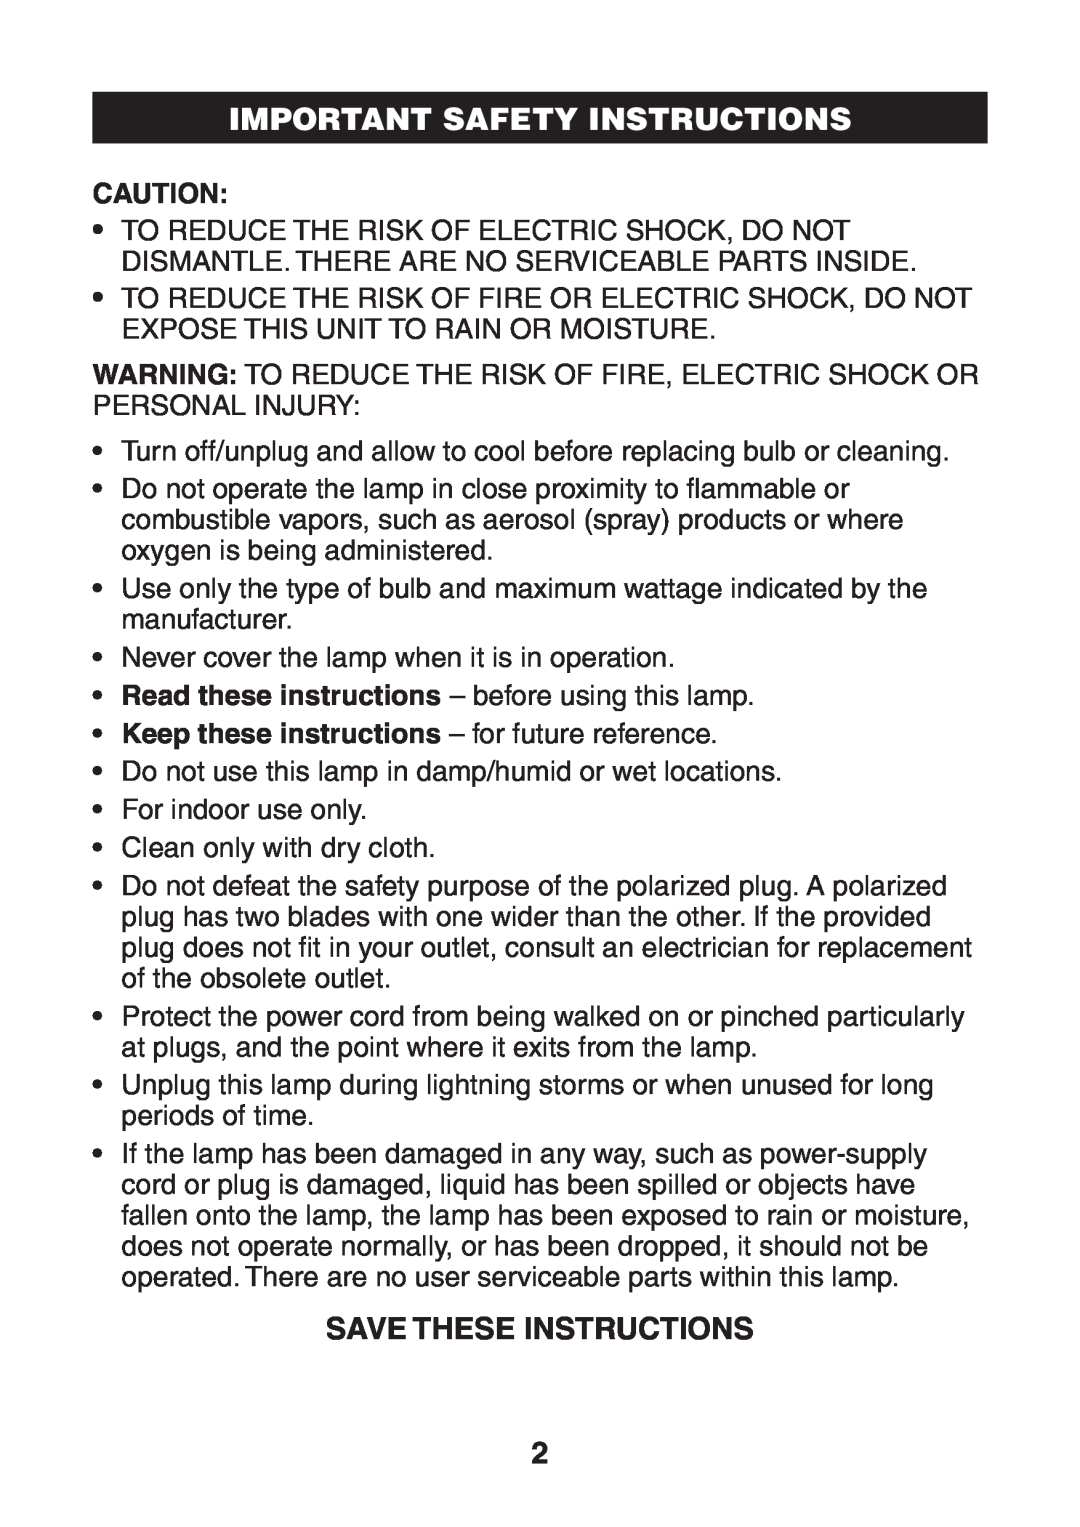 Verilux VF08 manual Important Safety Instructions, Save These Instructions, Keep these instructions - for future reference 